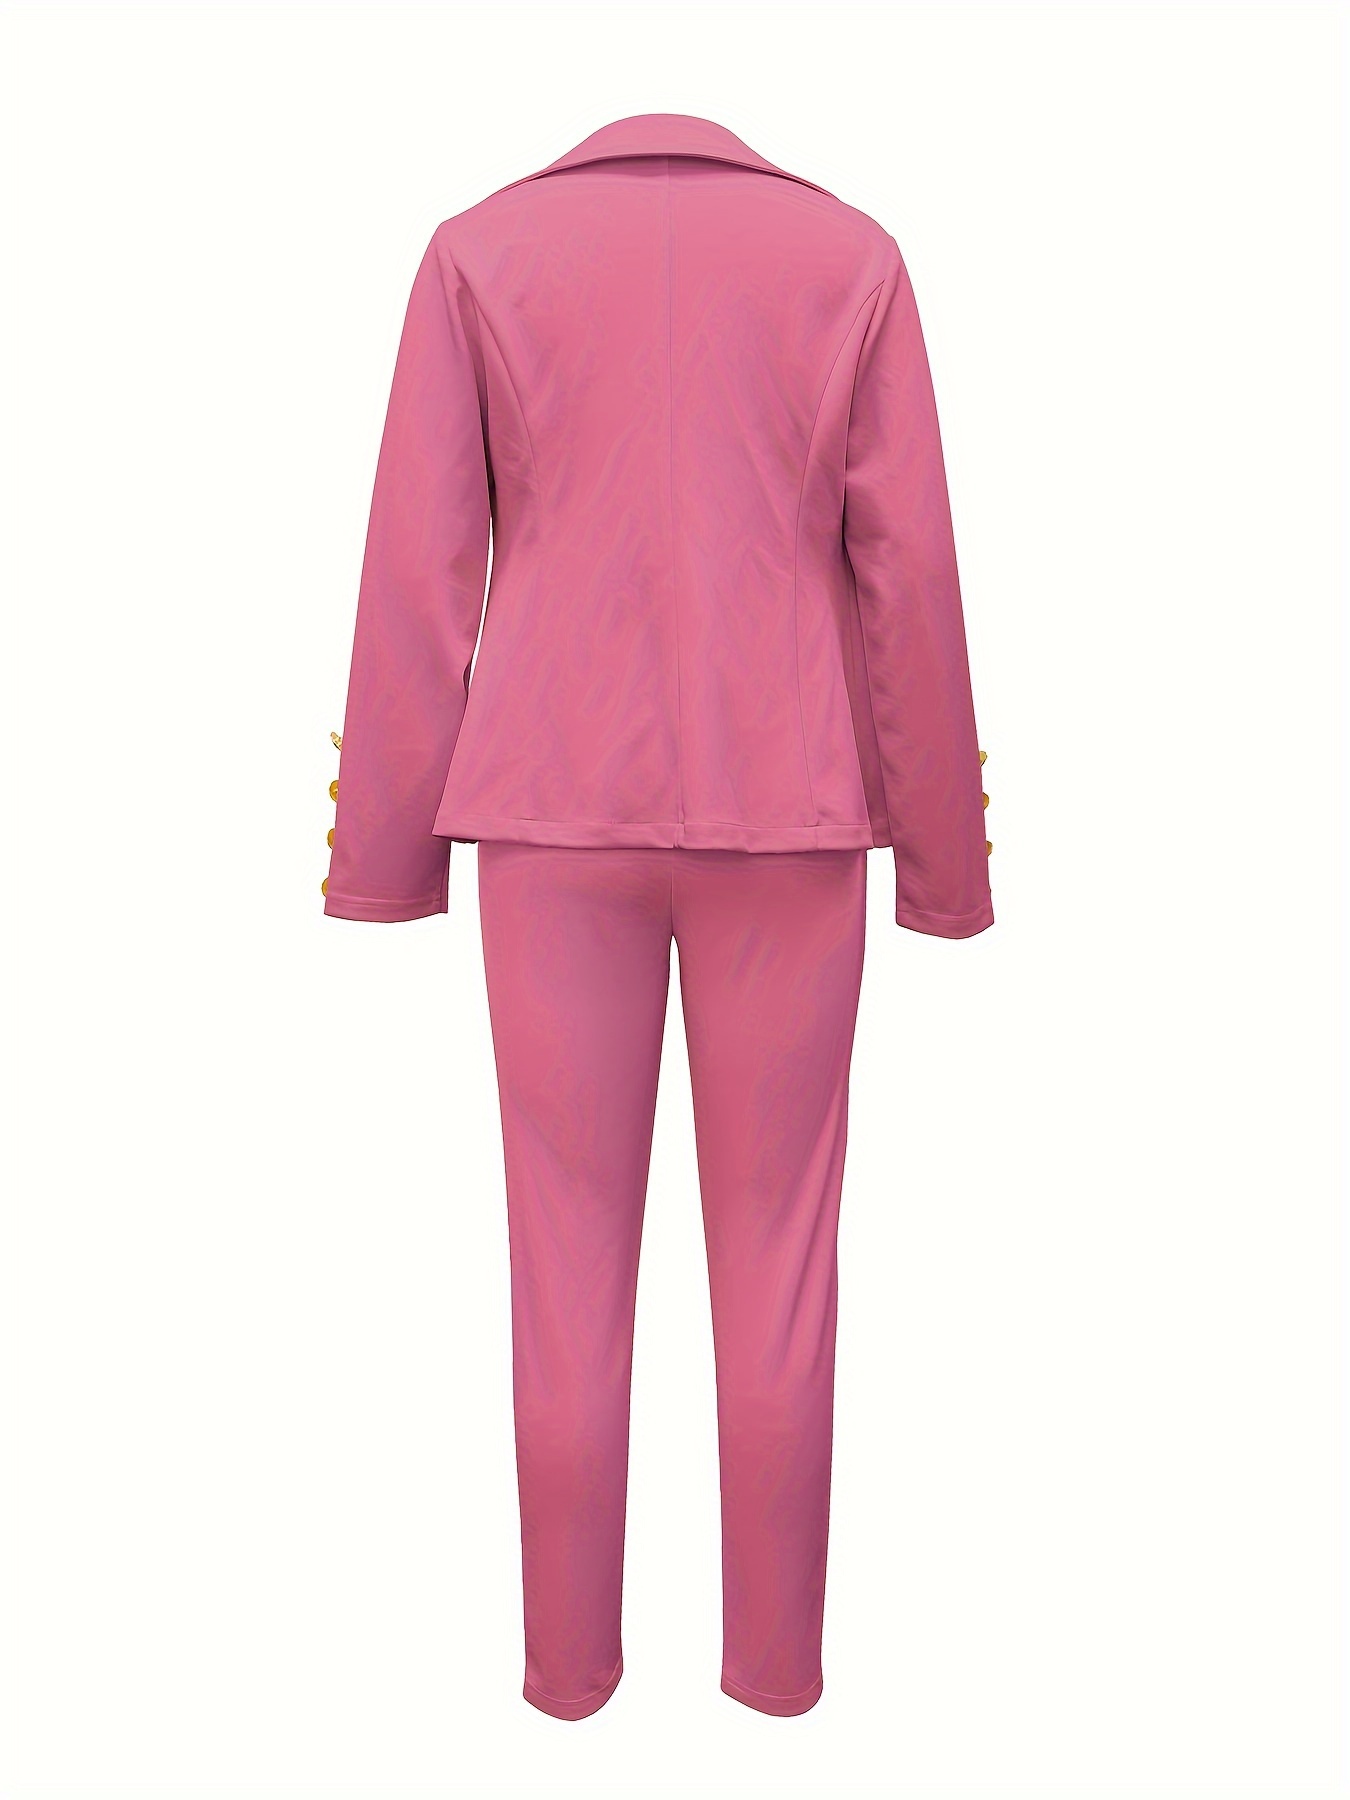 Two Piece Women Suit, Pink Office Suit With Blazer, Women Costume